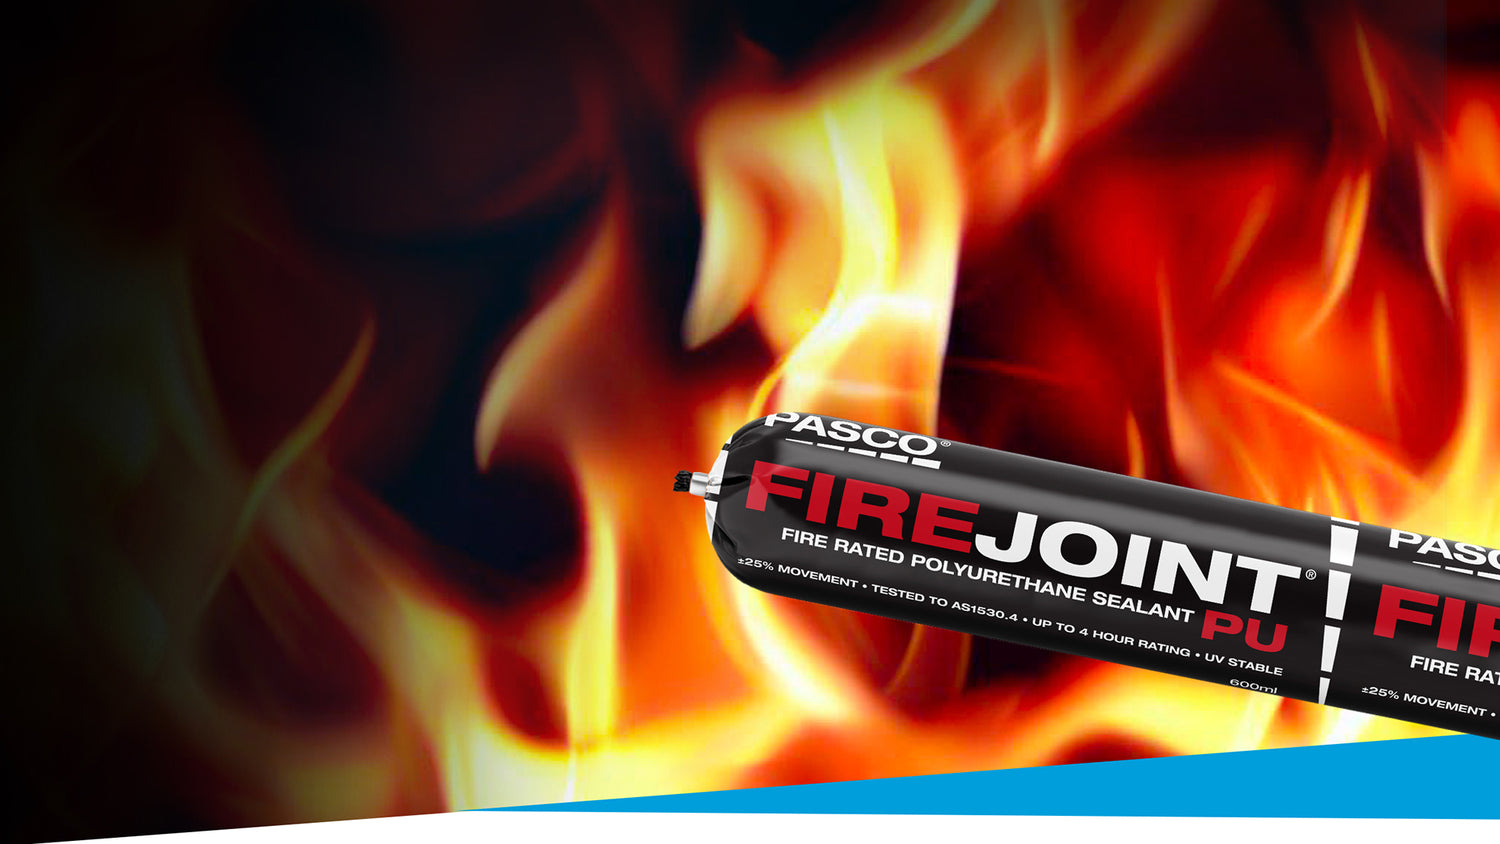 FireJoint Fire Rated Polyurethane Sealant